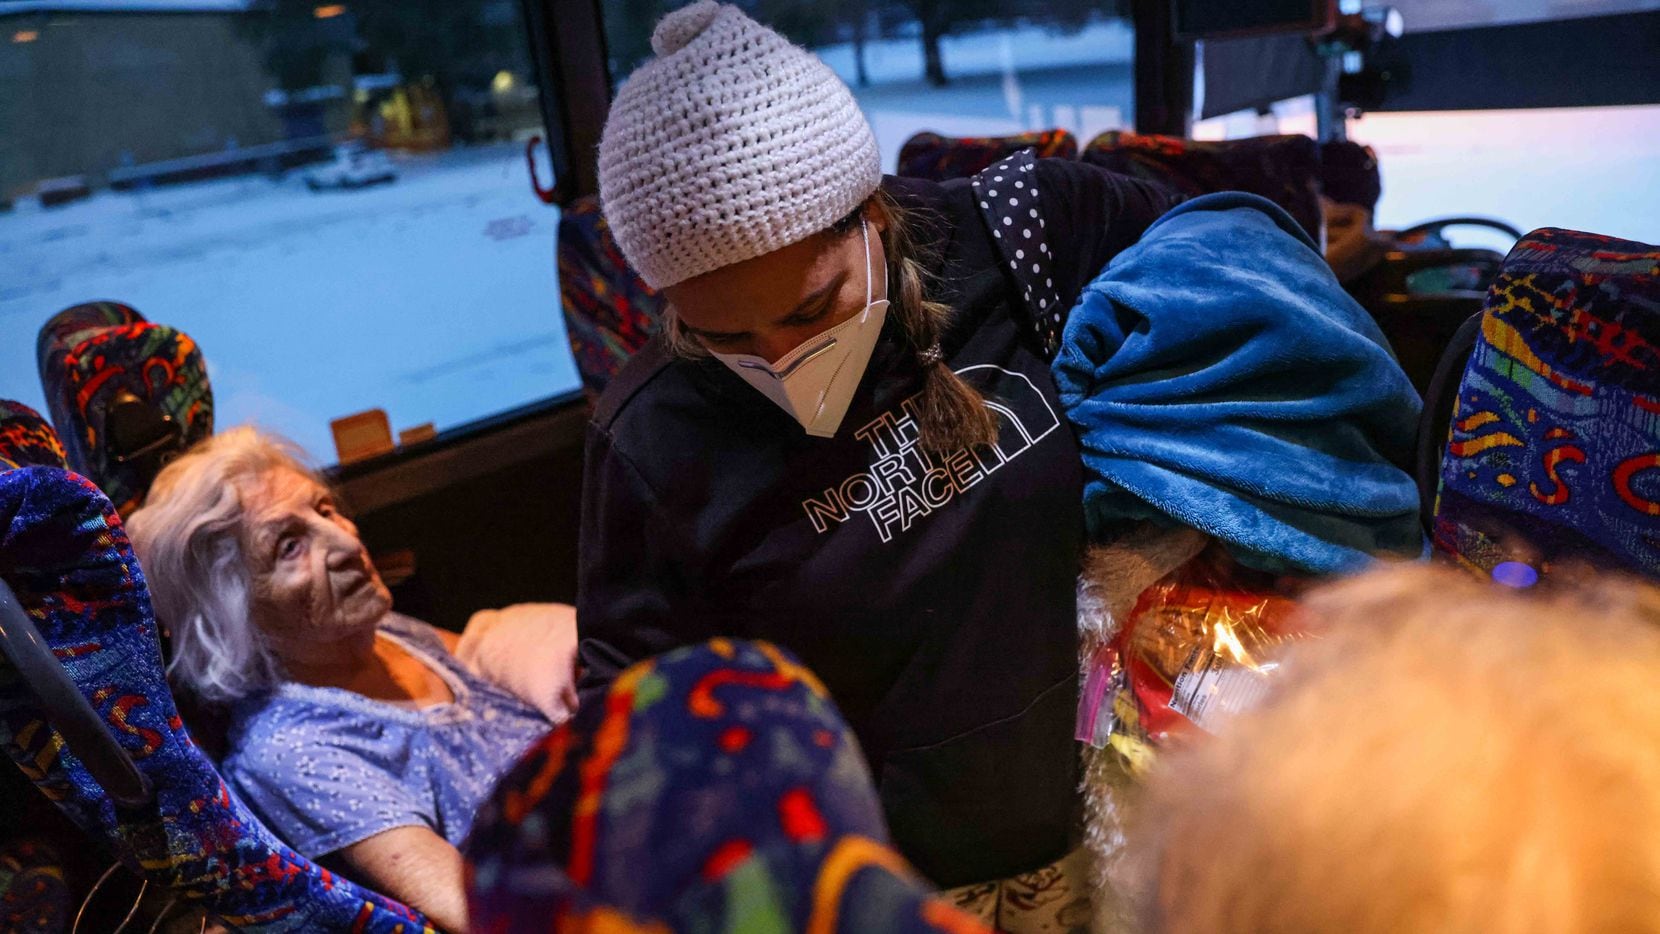 Marleny Almendarez, 38, makes her way into the bus that serves as a warming center located...